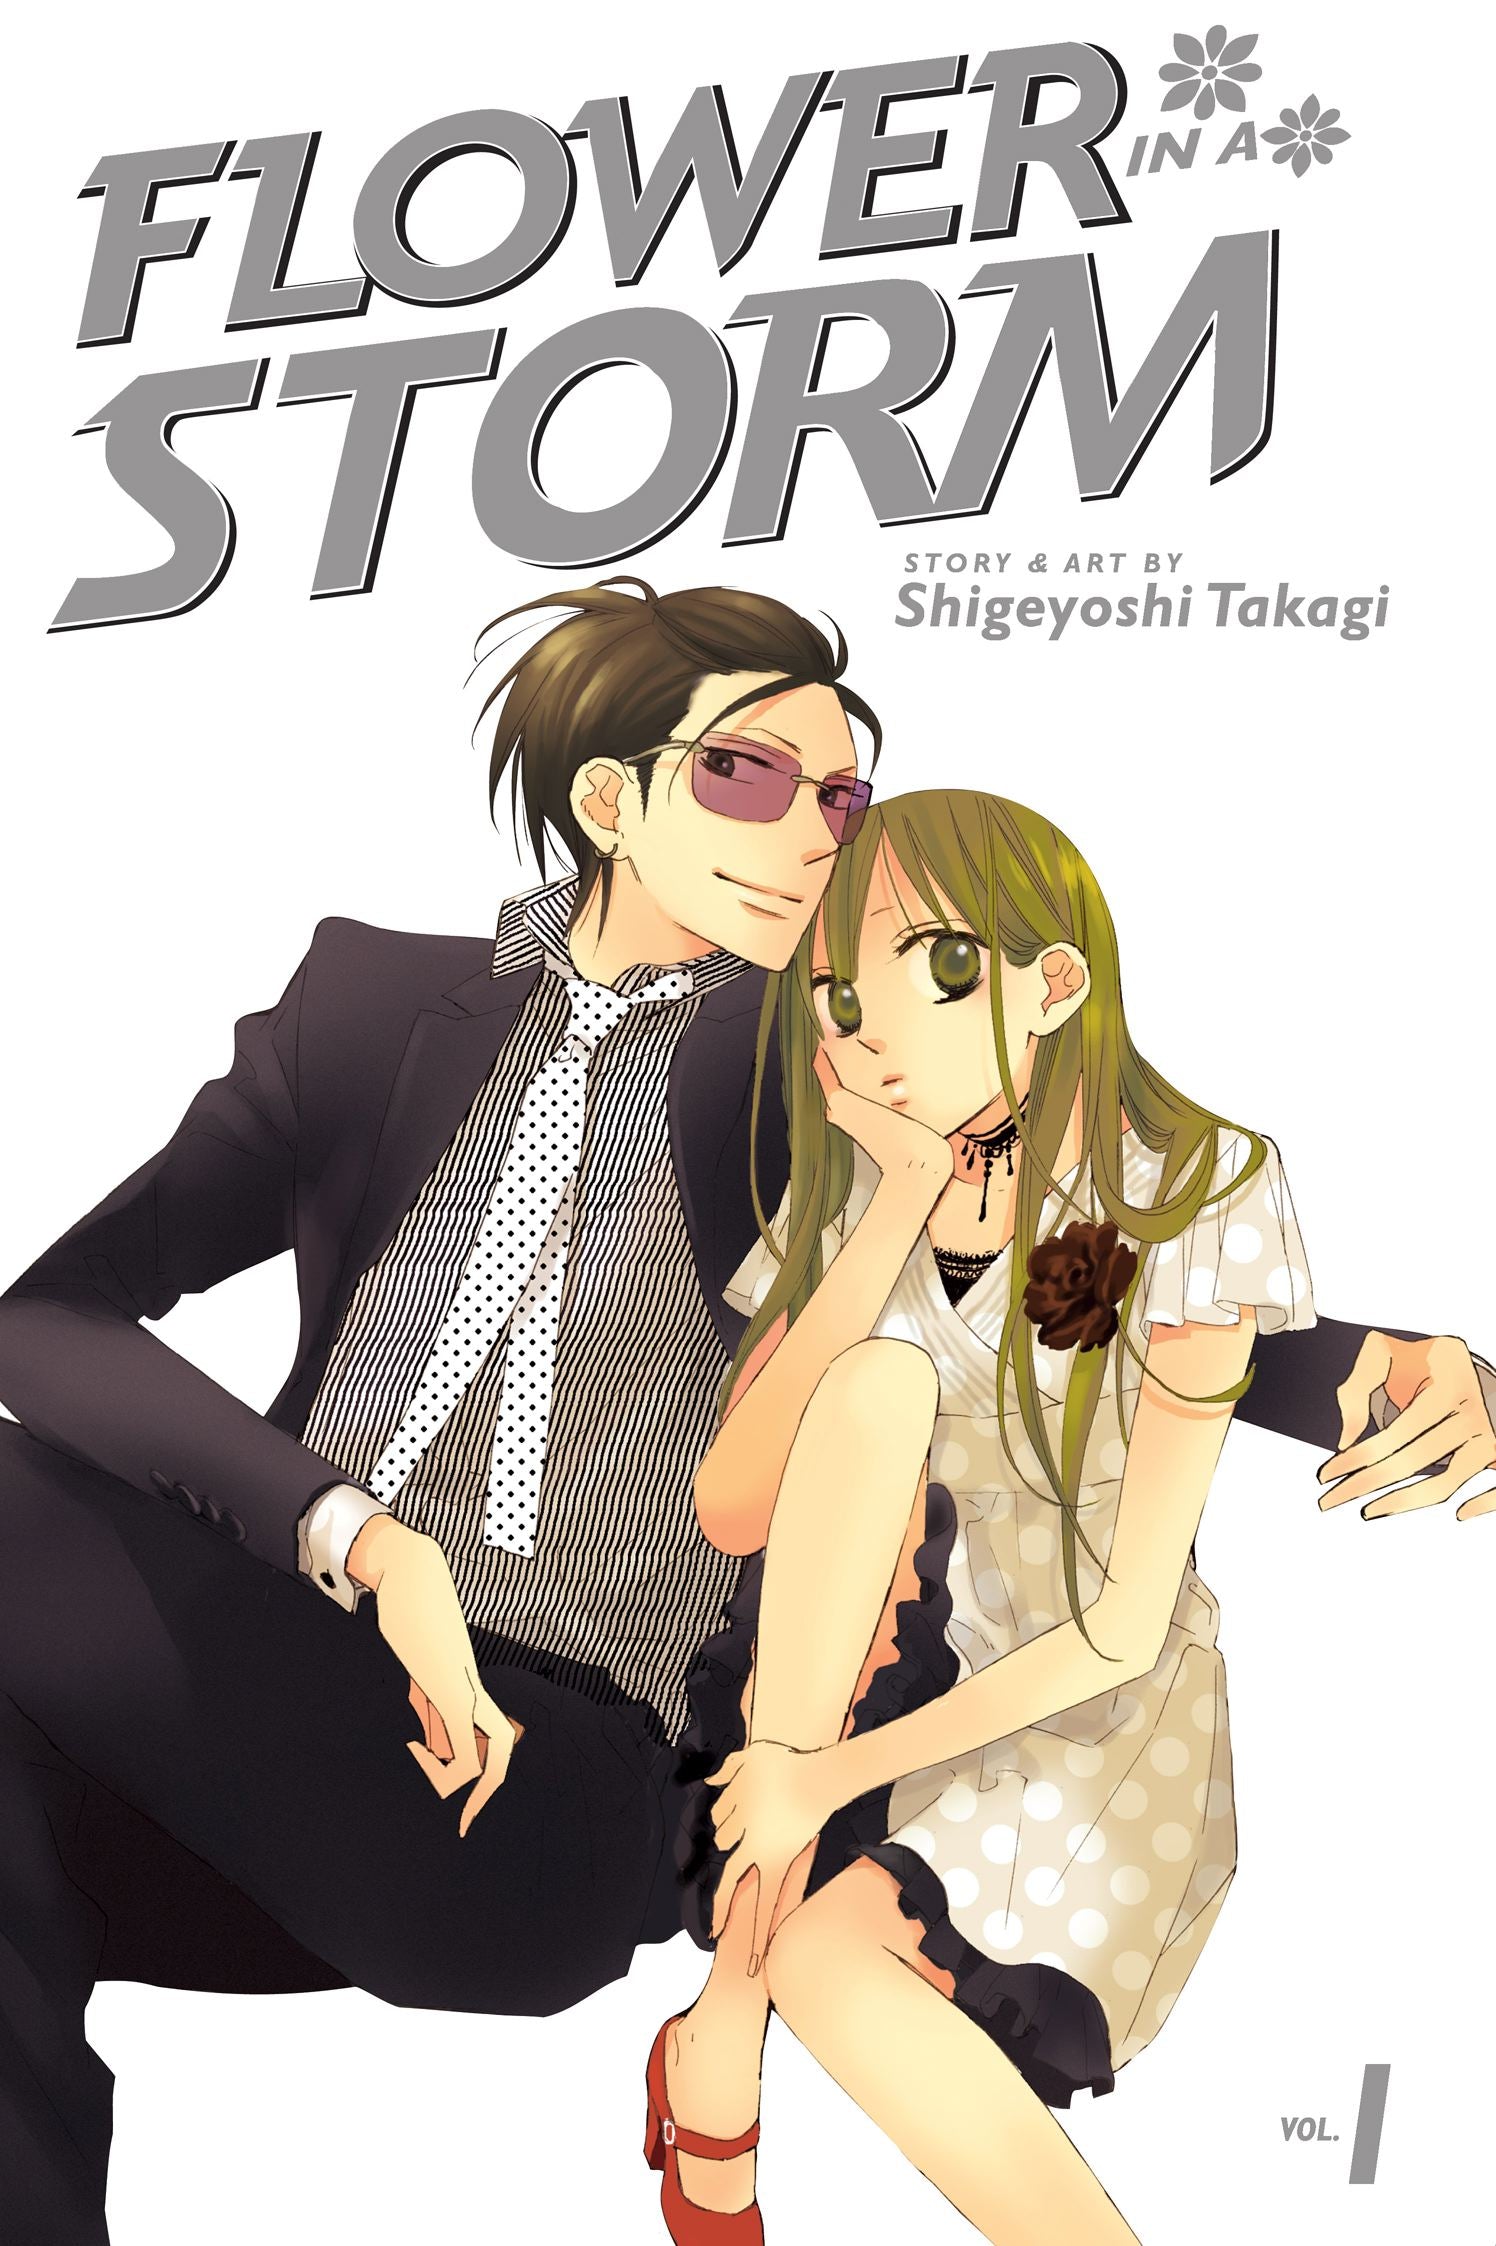 Flower in a Storm, Vol. 1